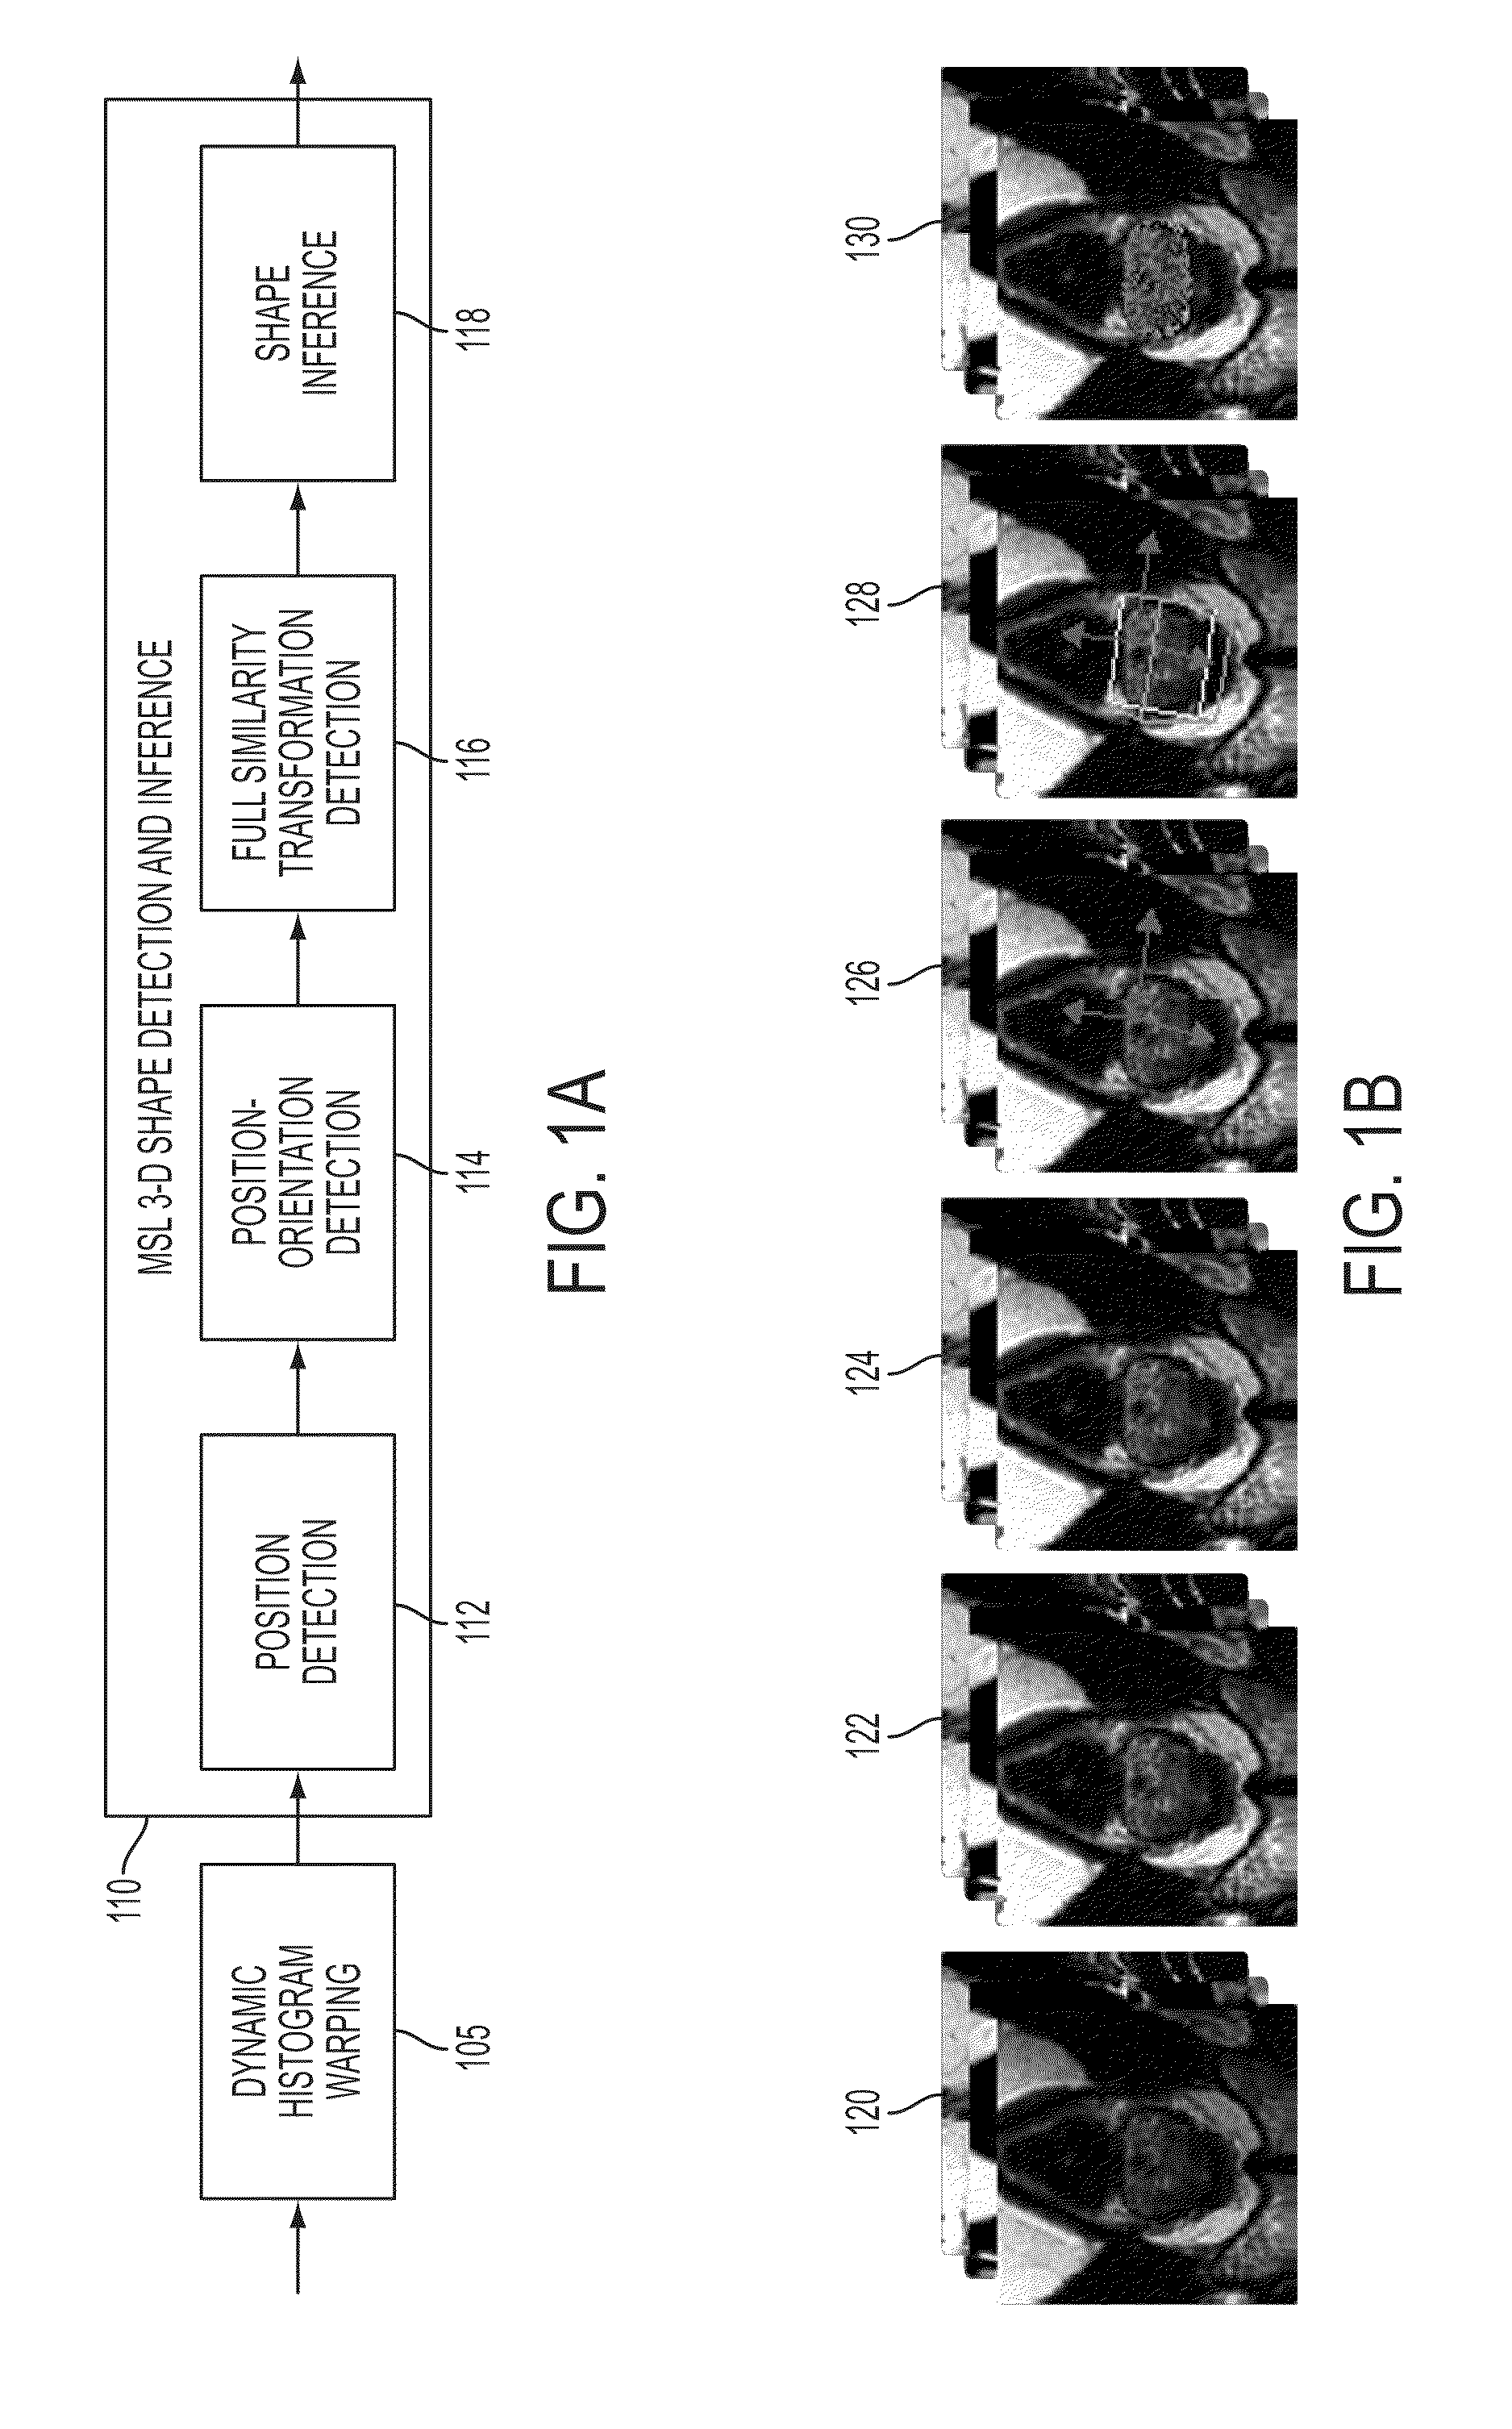 Method and system for segmentation of the prostate in 3D magnetic resonance images